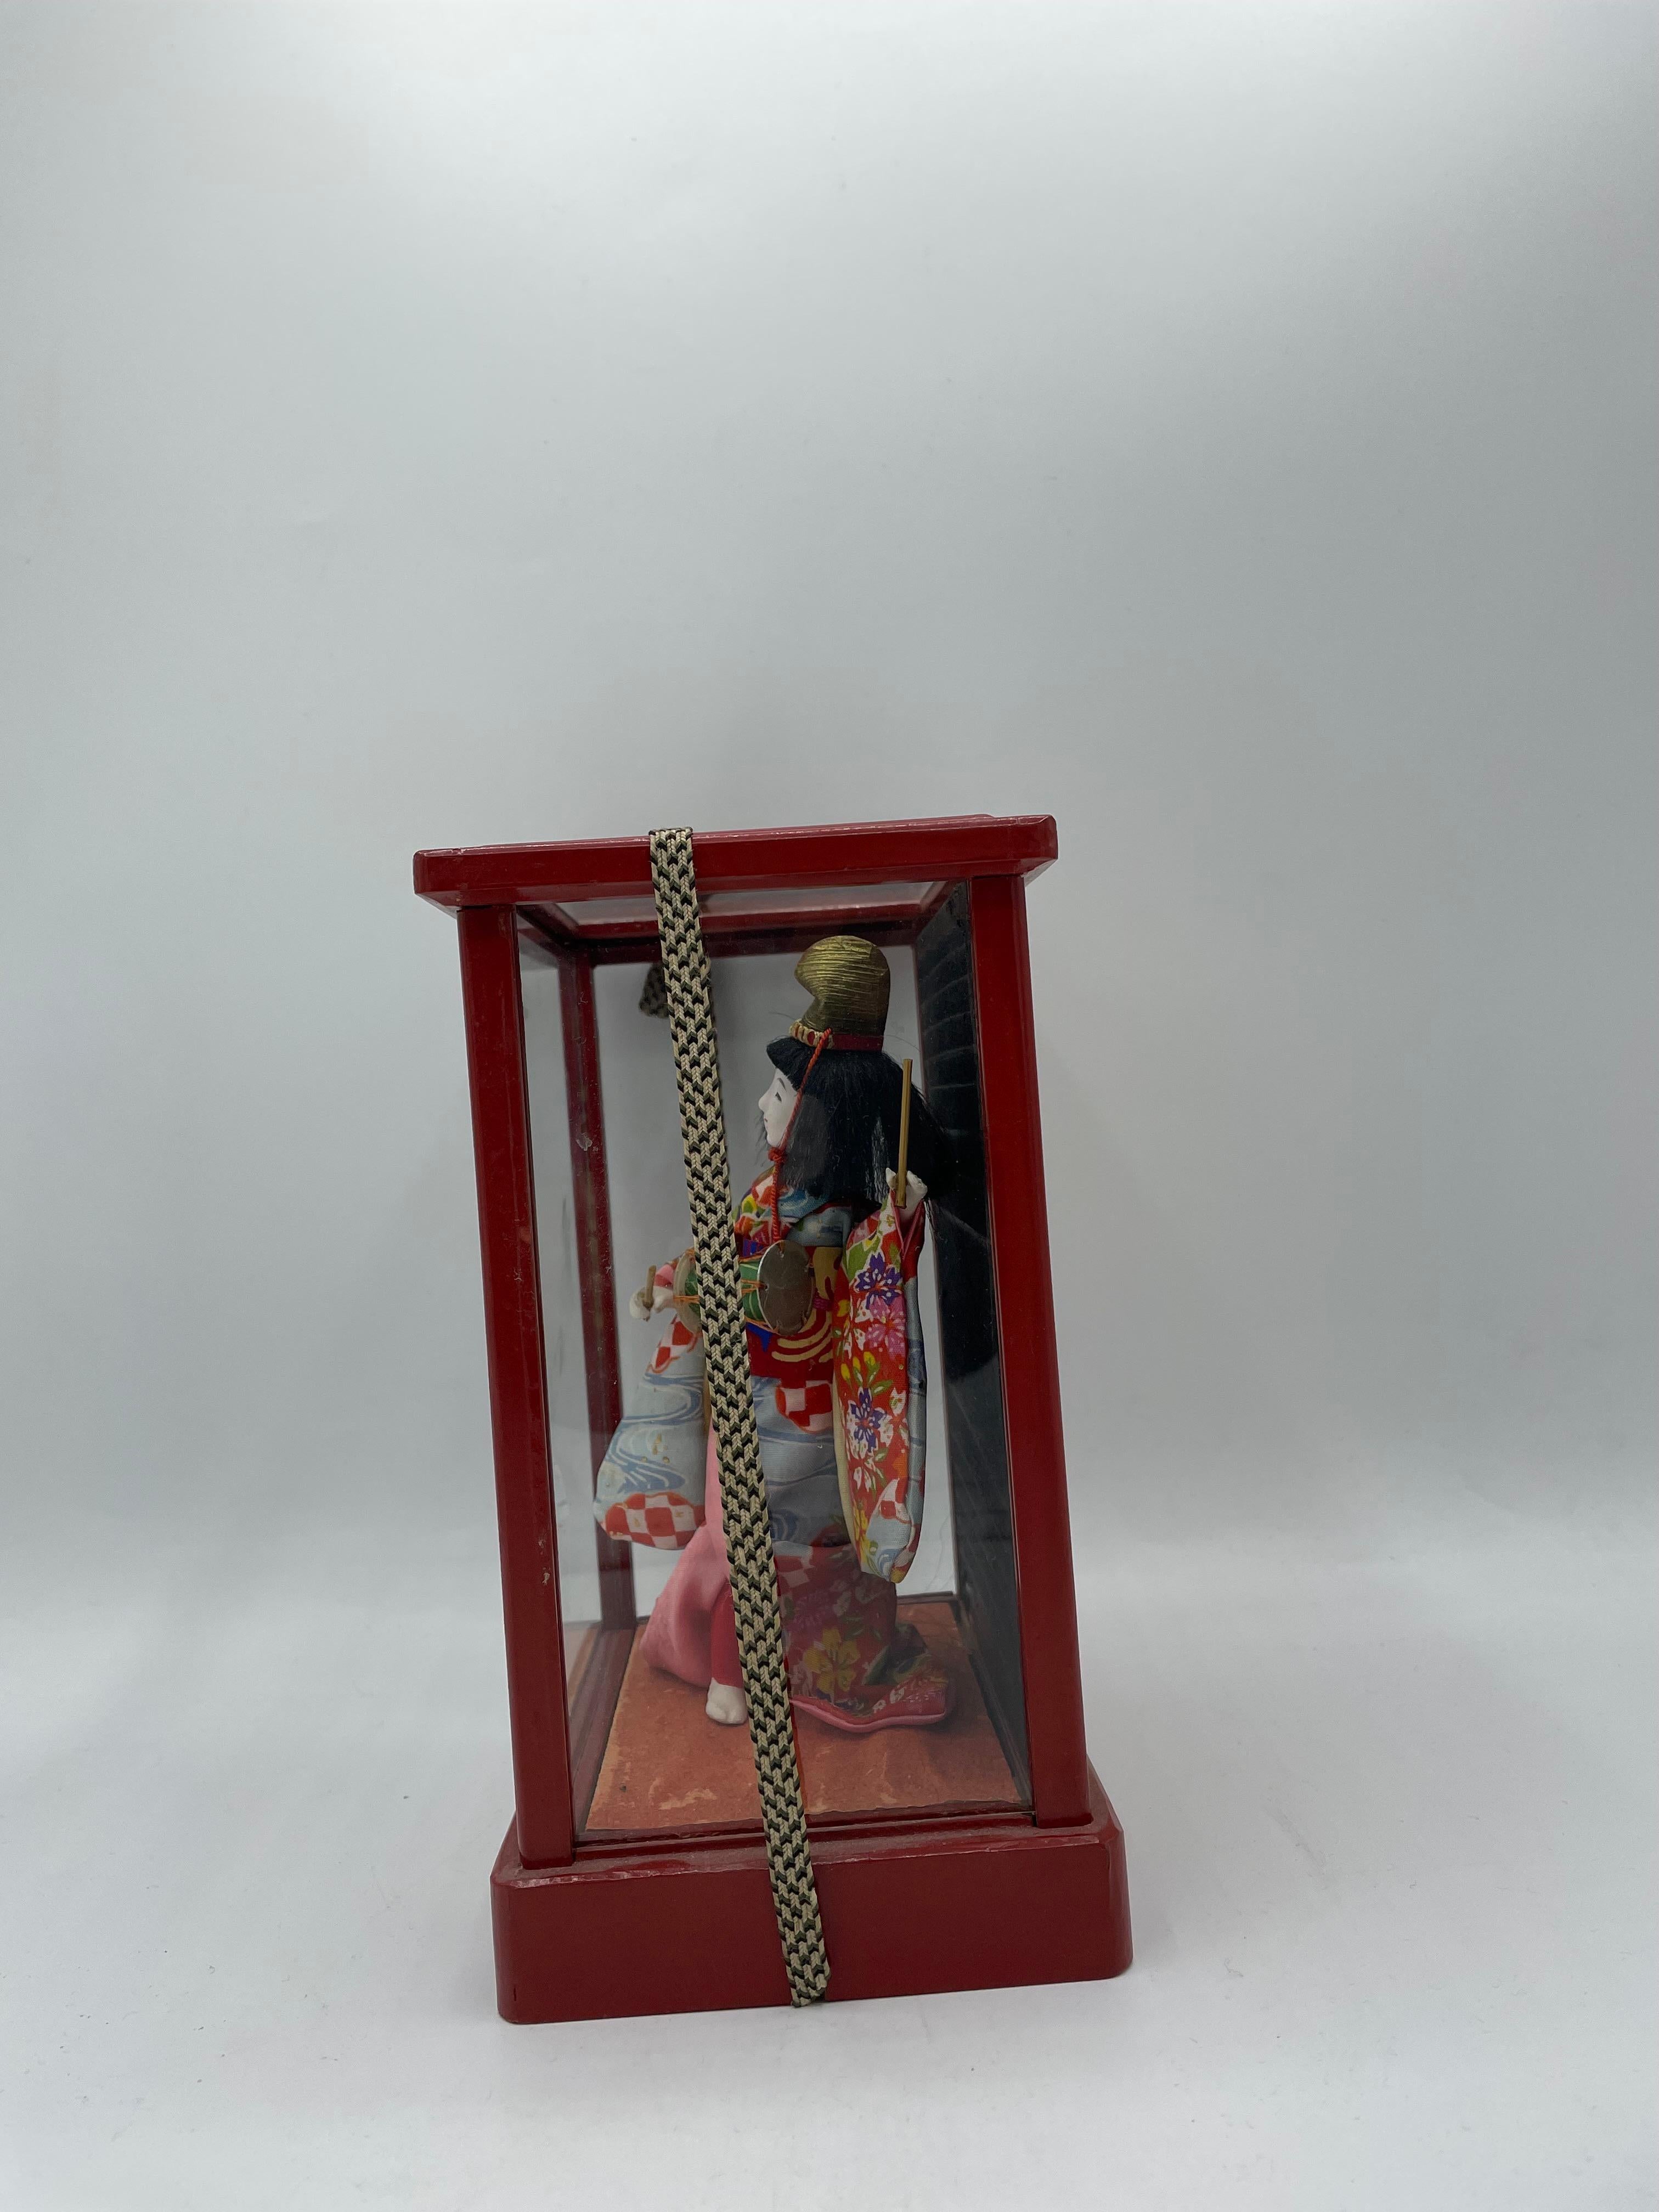 This is a Japanese Traditional doll which was made in 1970 in Showa era.
This doll is in a box which is made with wood and glass.
This doll is made with porcelain and she is wearing a kimono which is made with silk.

Dimensions:
H20 x 14.5 x 10.5 cm
